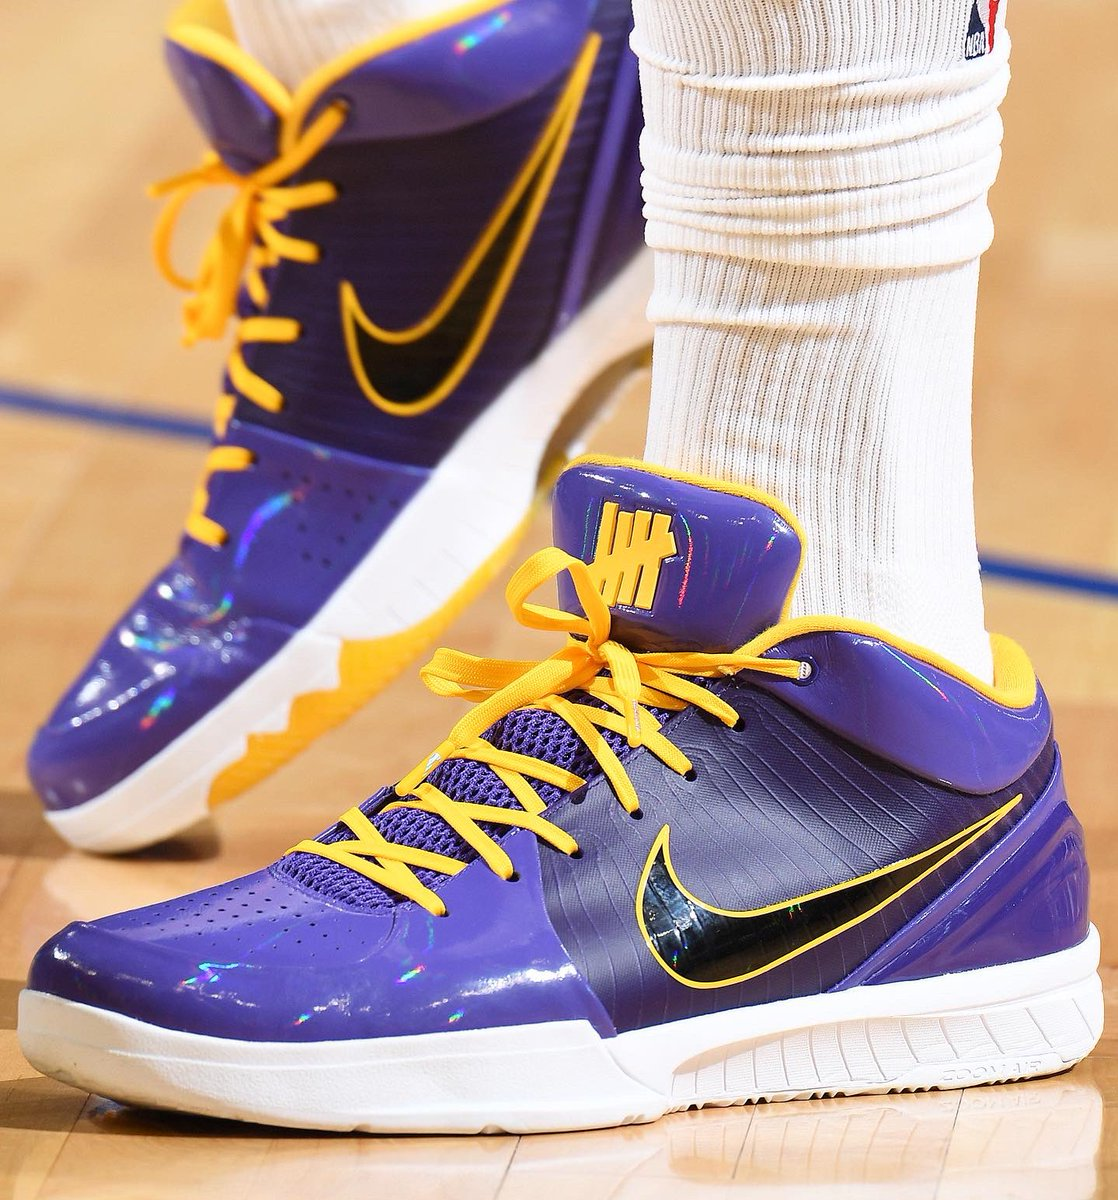 Nike Kobe 4 Protro Undefeated Los Angeles Lakers - m.flamsneaker.com